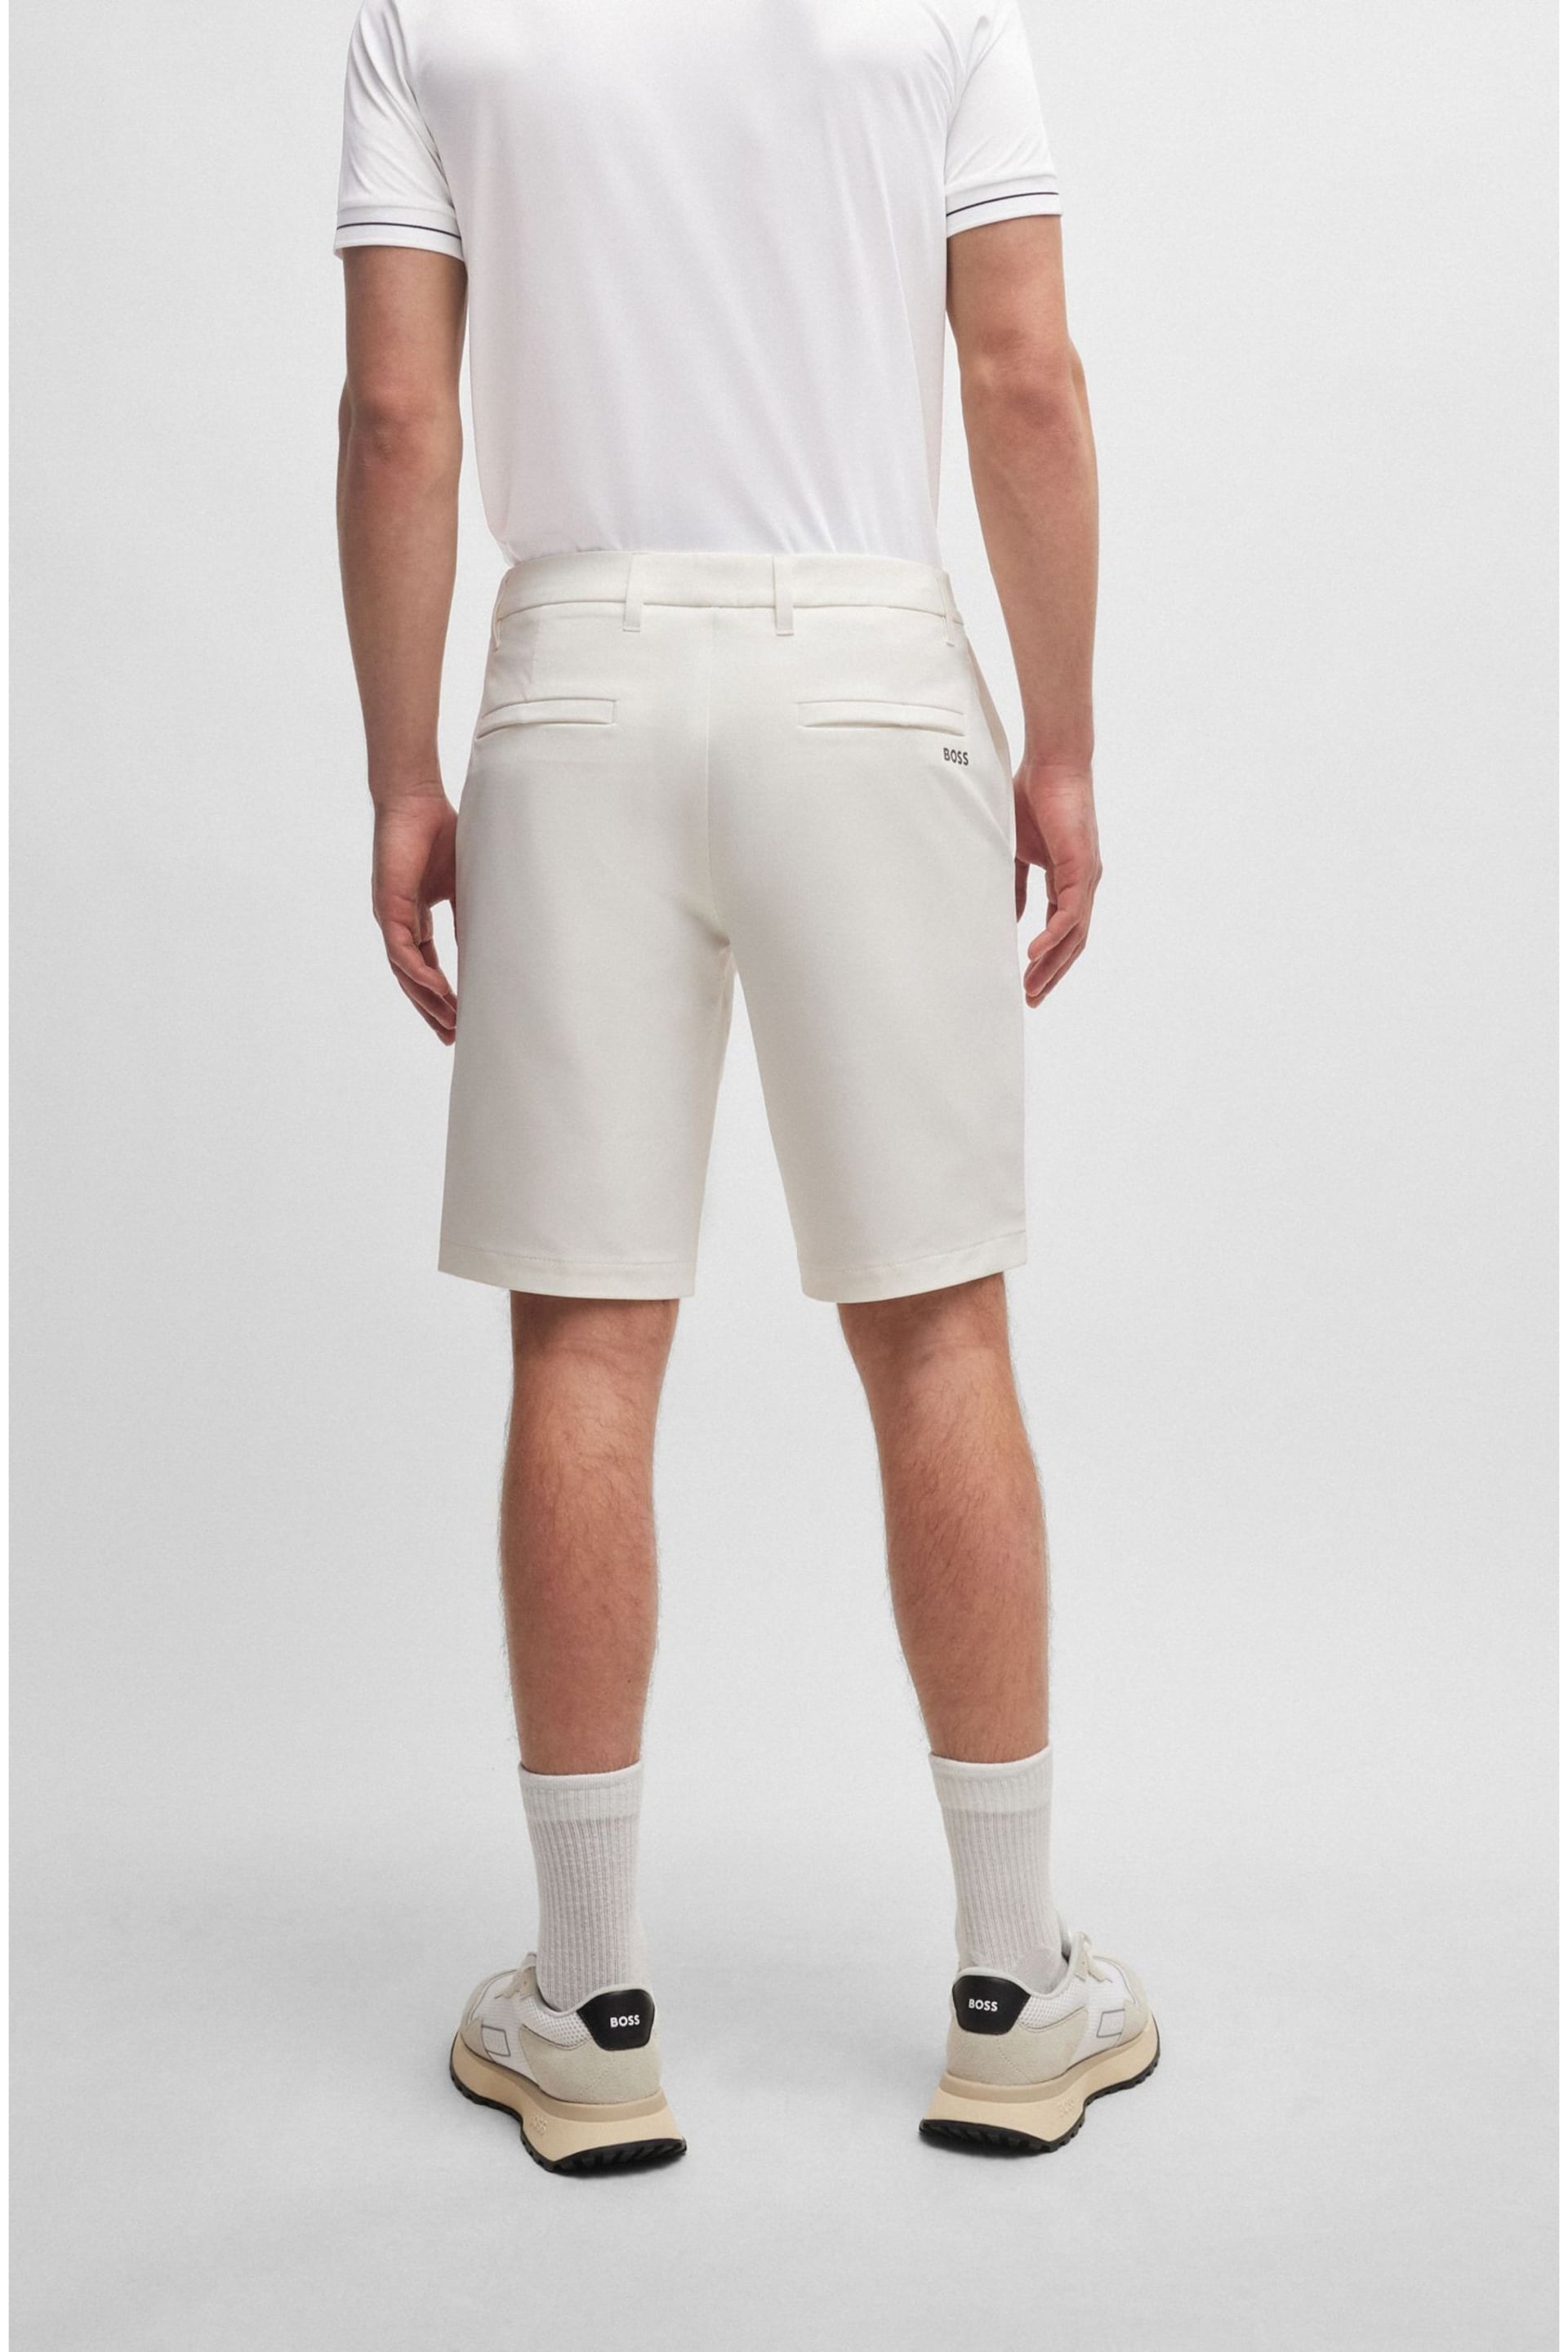 BOSS White Slim-Fit Shorts in Water-Repellent Easy-Iron Fabric - Image 2 of 5